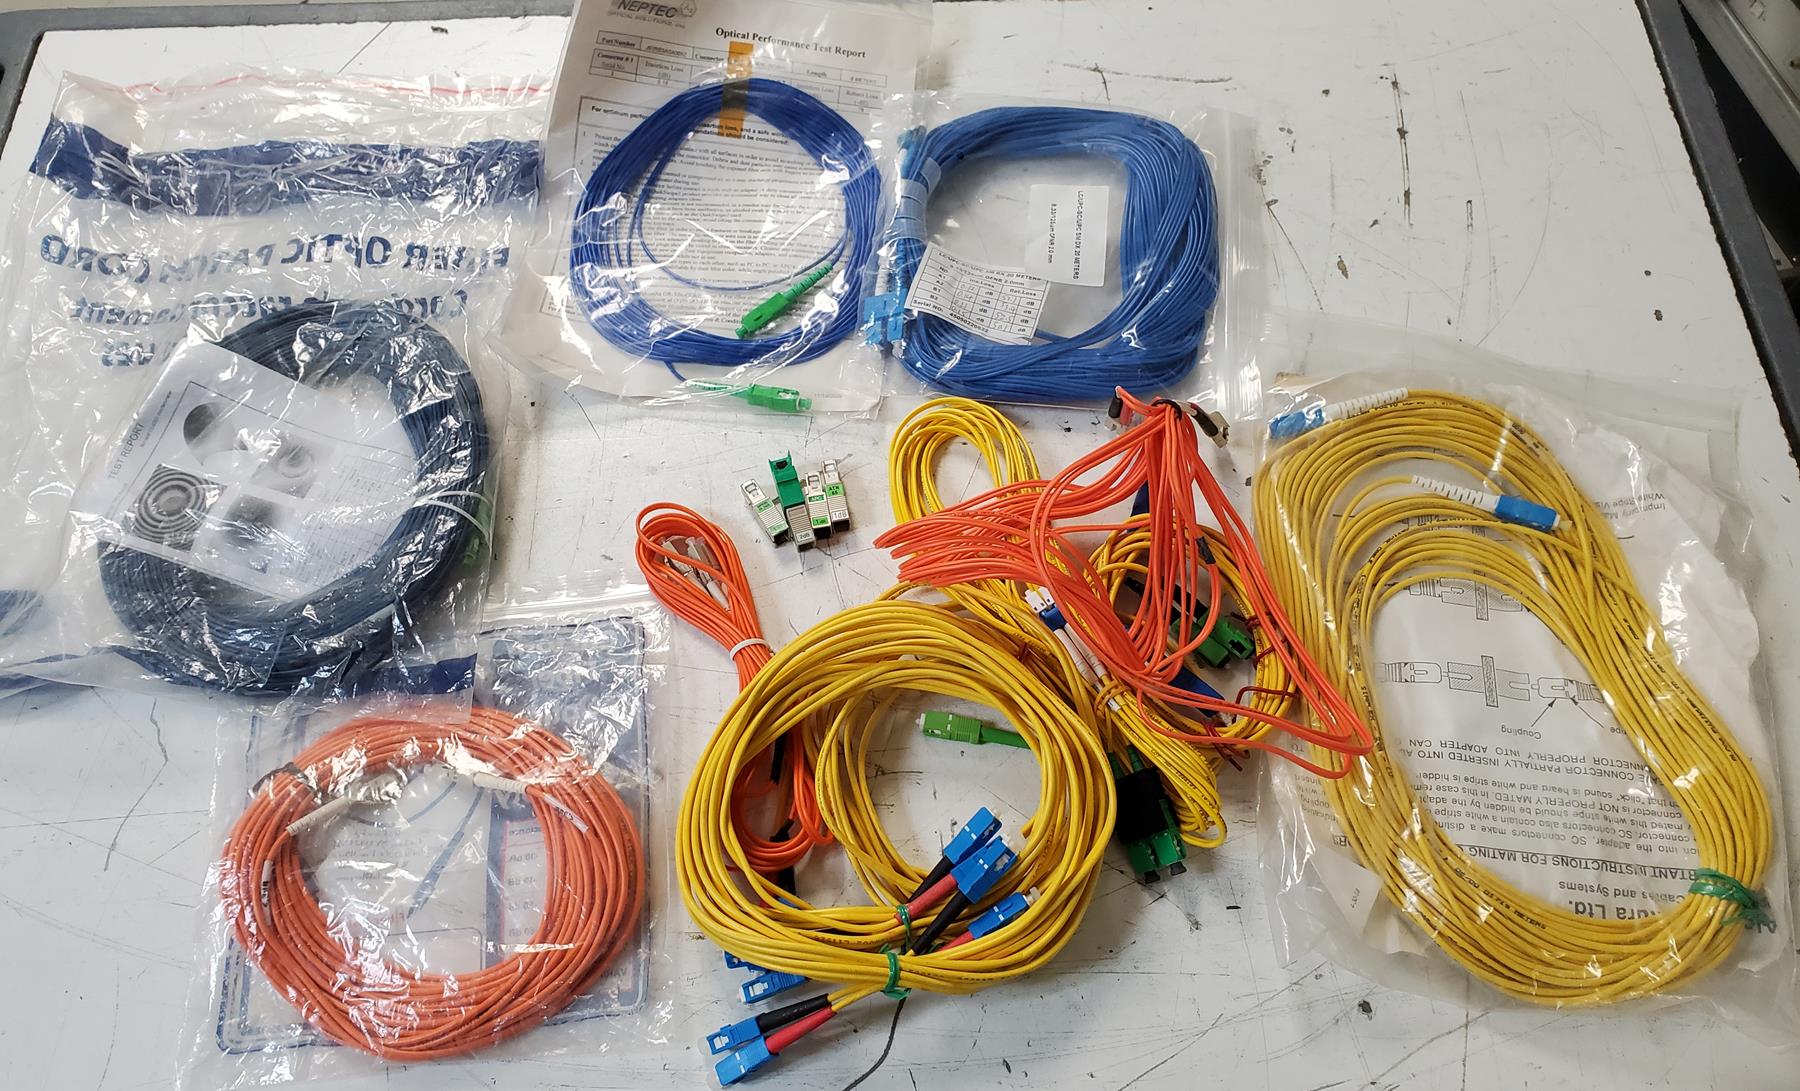 AccuSource patchcord mixed lot just arrived